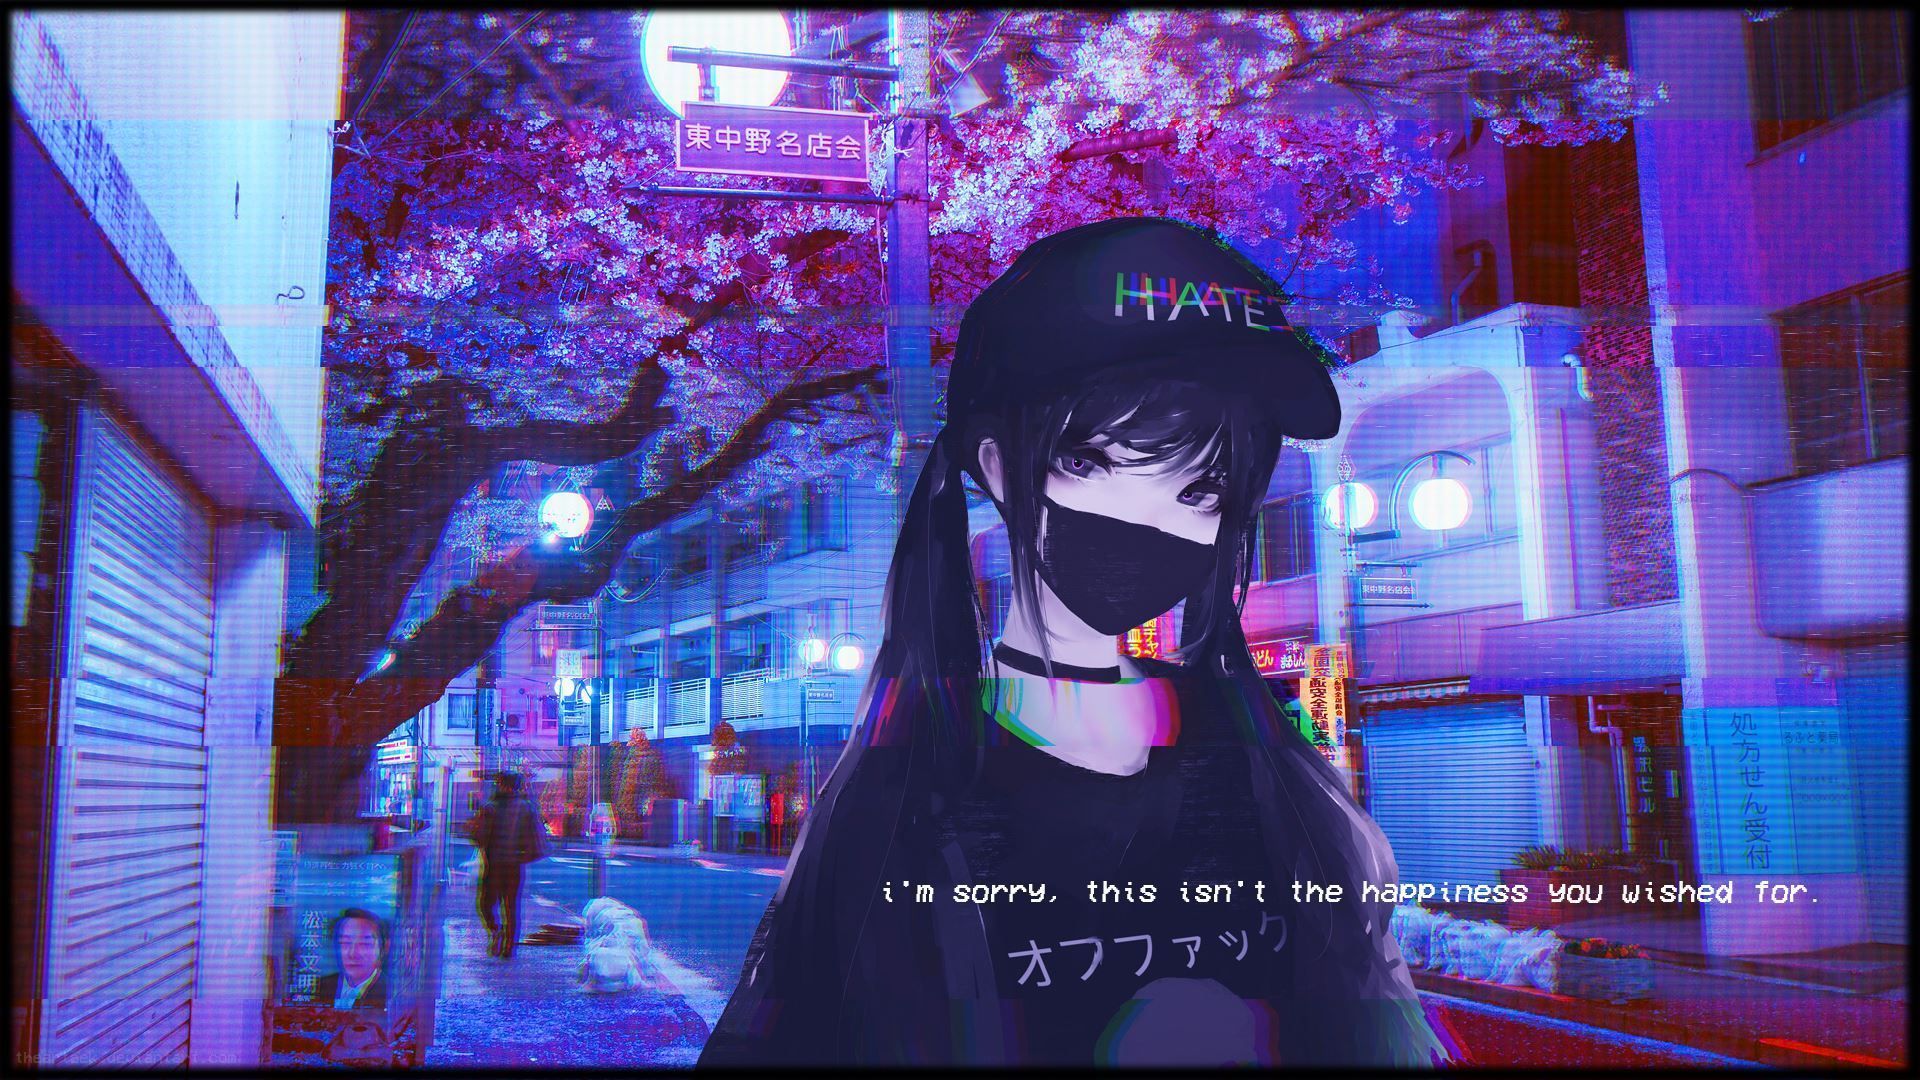 Awesome Dark Anime Glitch Wallpaper. Aesthetic anime, Dark anime, Anime wallpaper